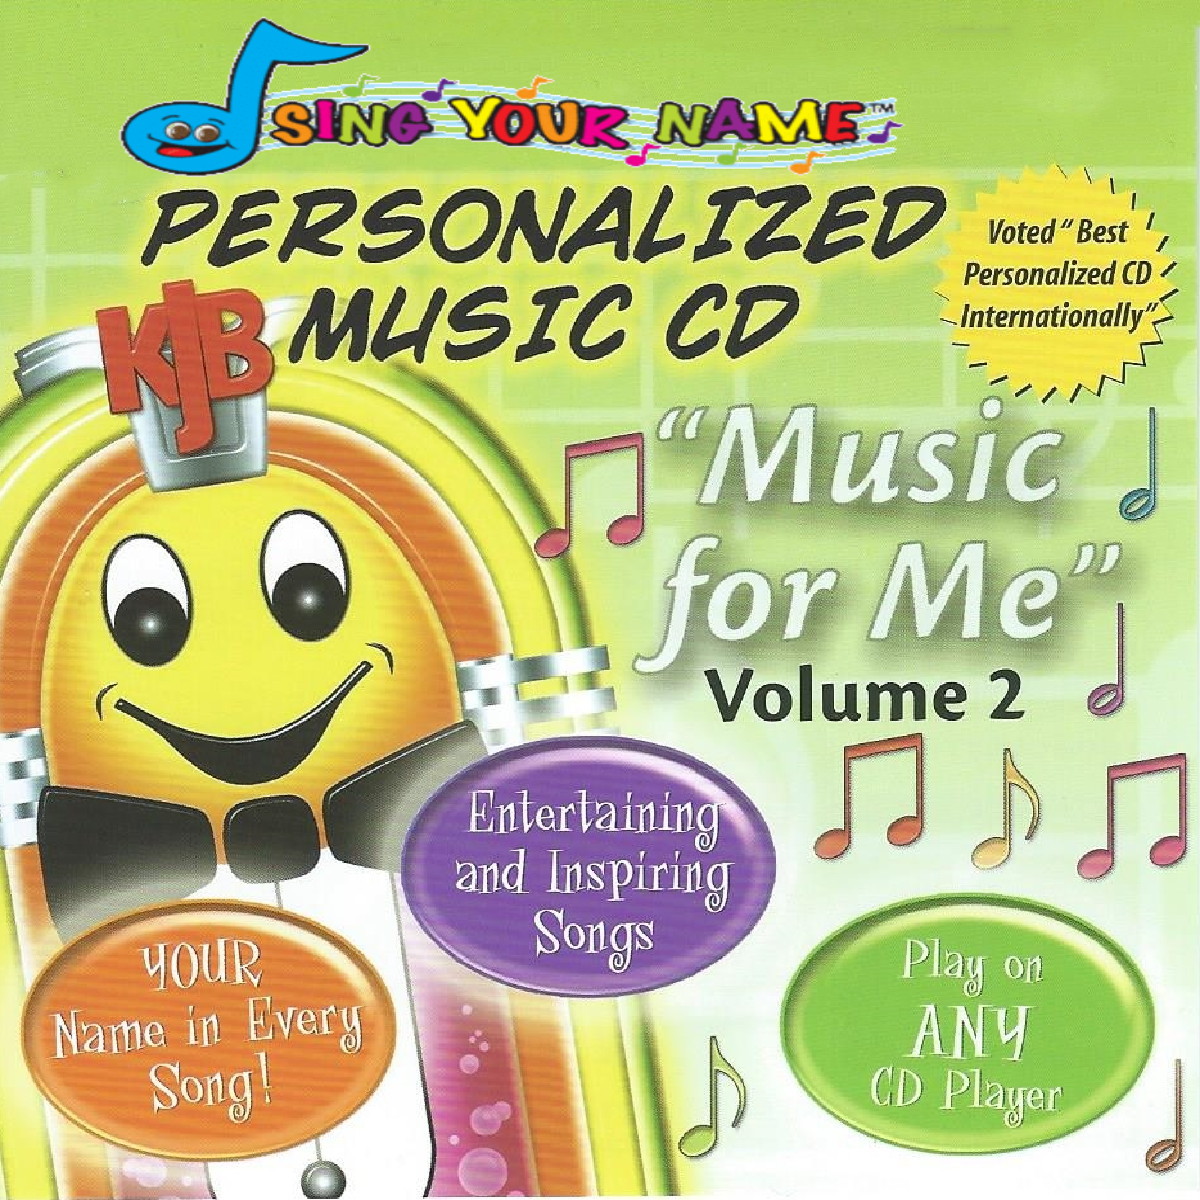 Music For Me Volume 2 - CD & MP3 Download